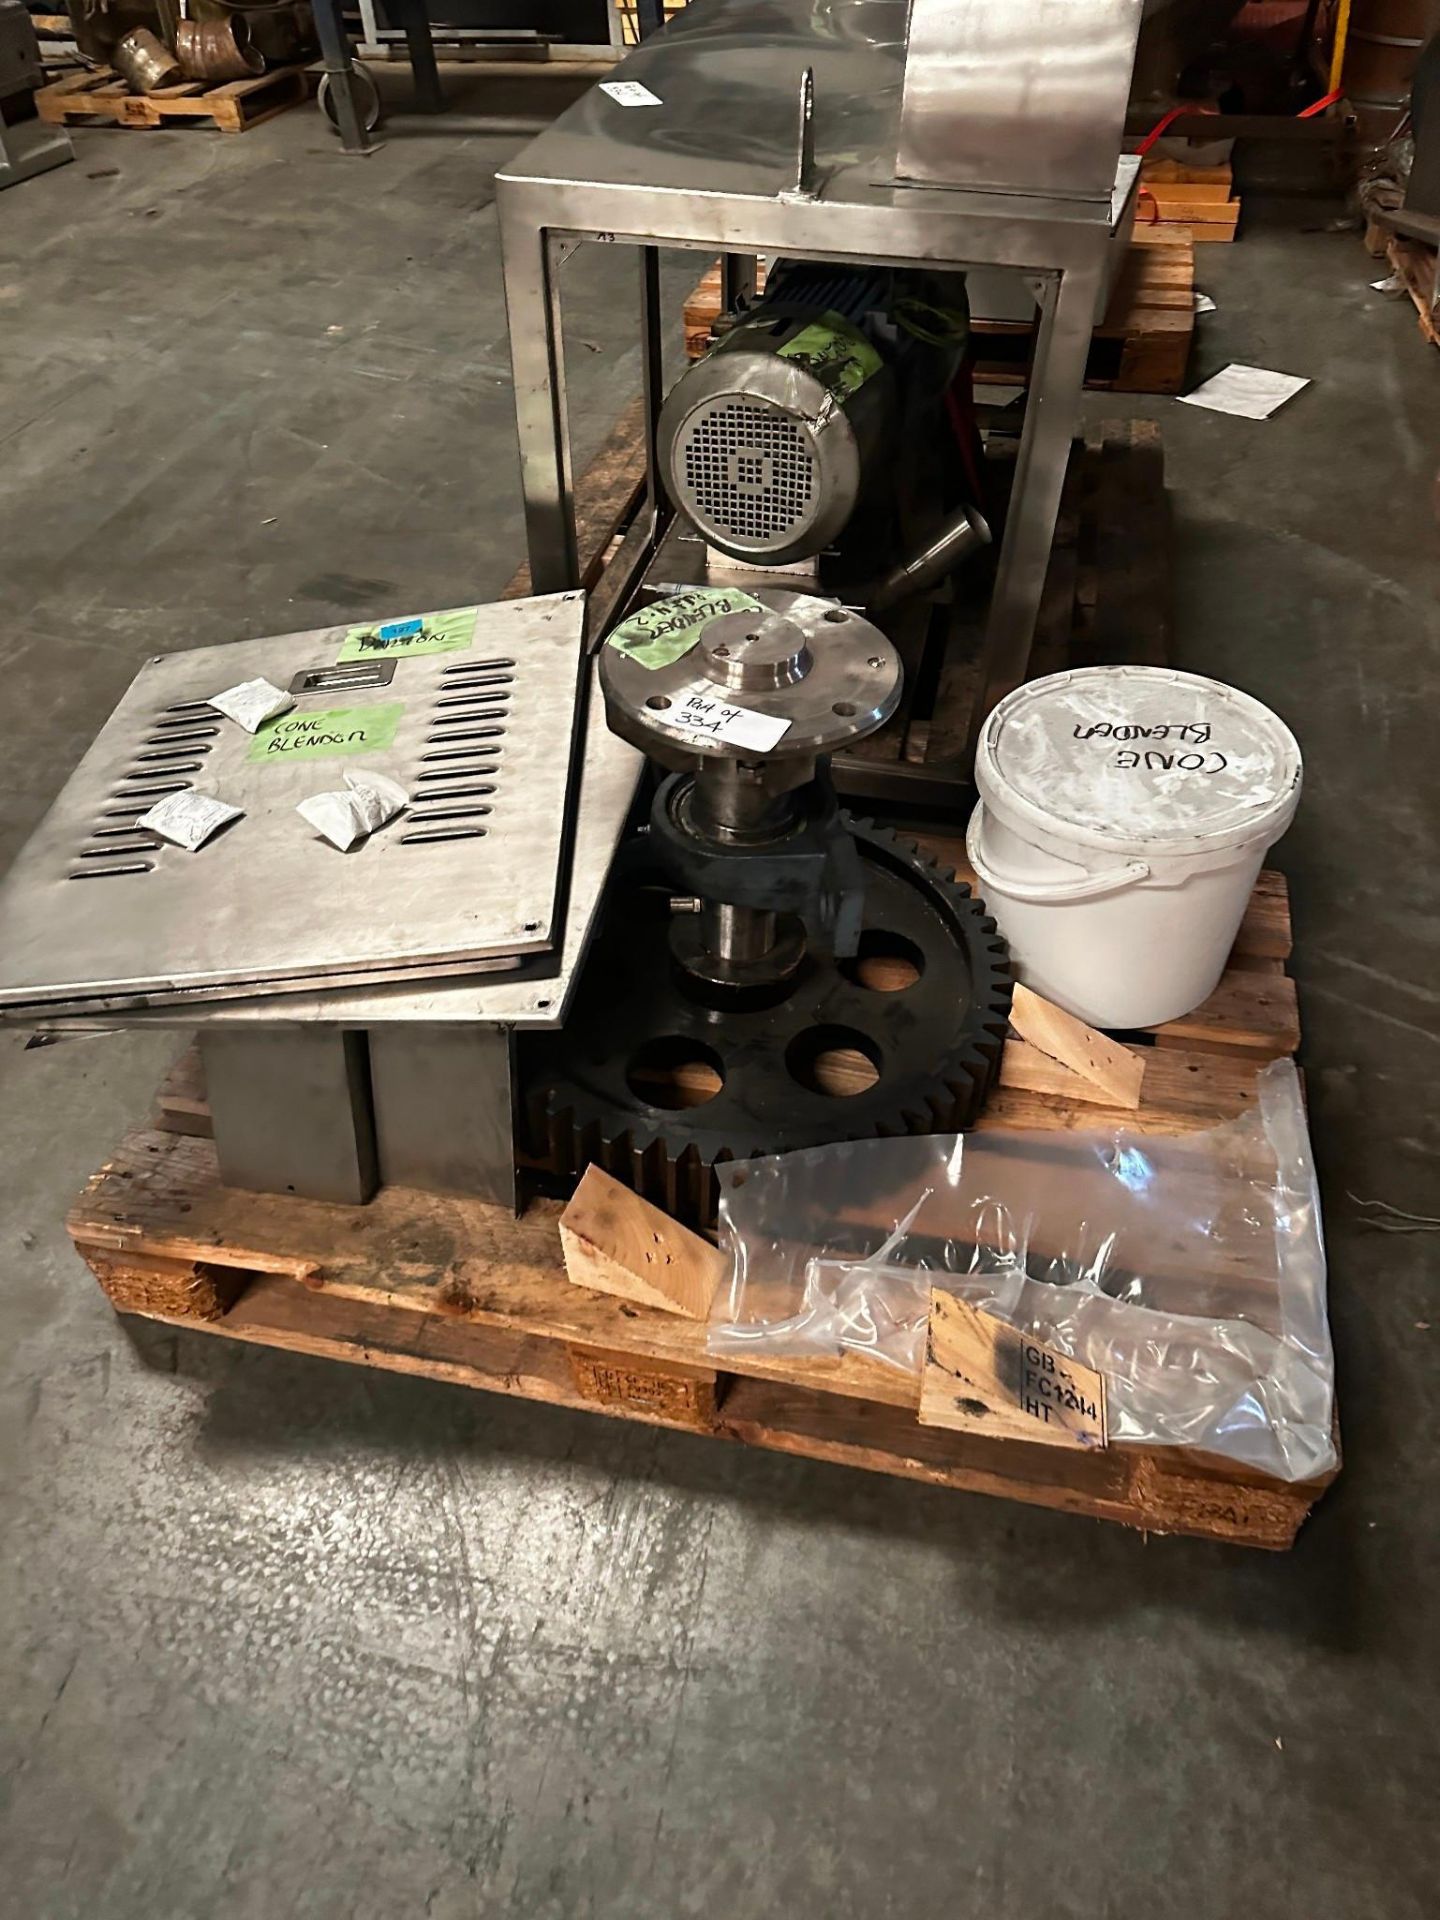 BRITISH REMO MODEL 2000DL STAINLESS STEEL DOUBLE CONE BLENDER. MFG 2018 - NEVER USED - Image 12 of 23